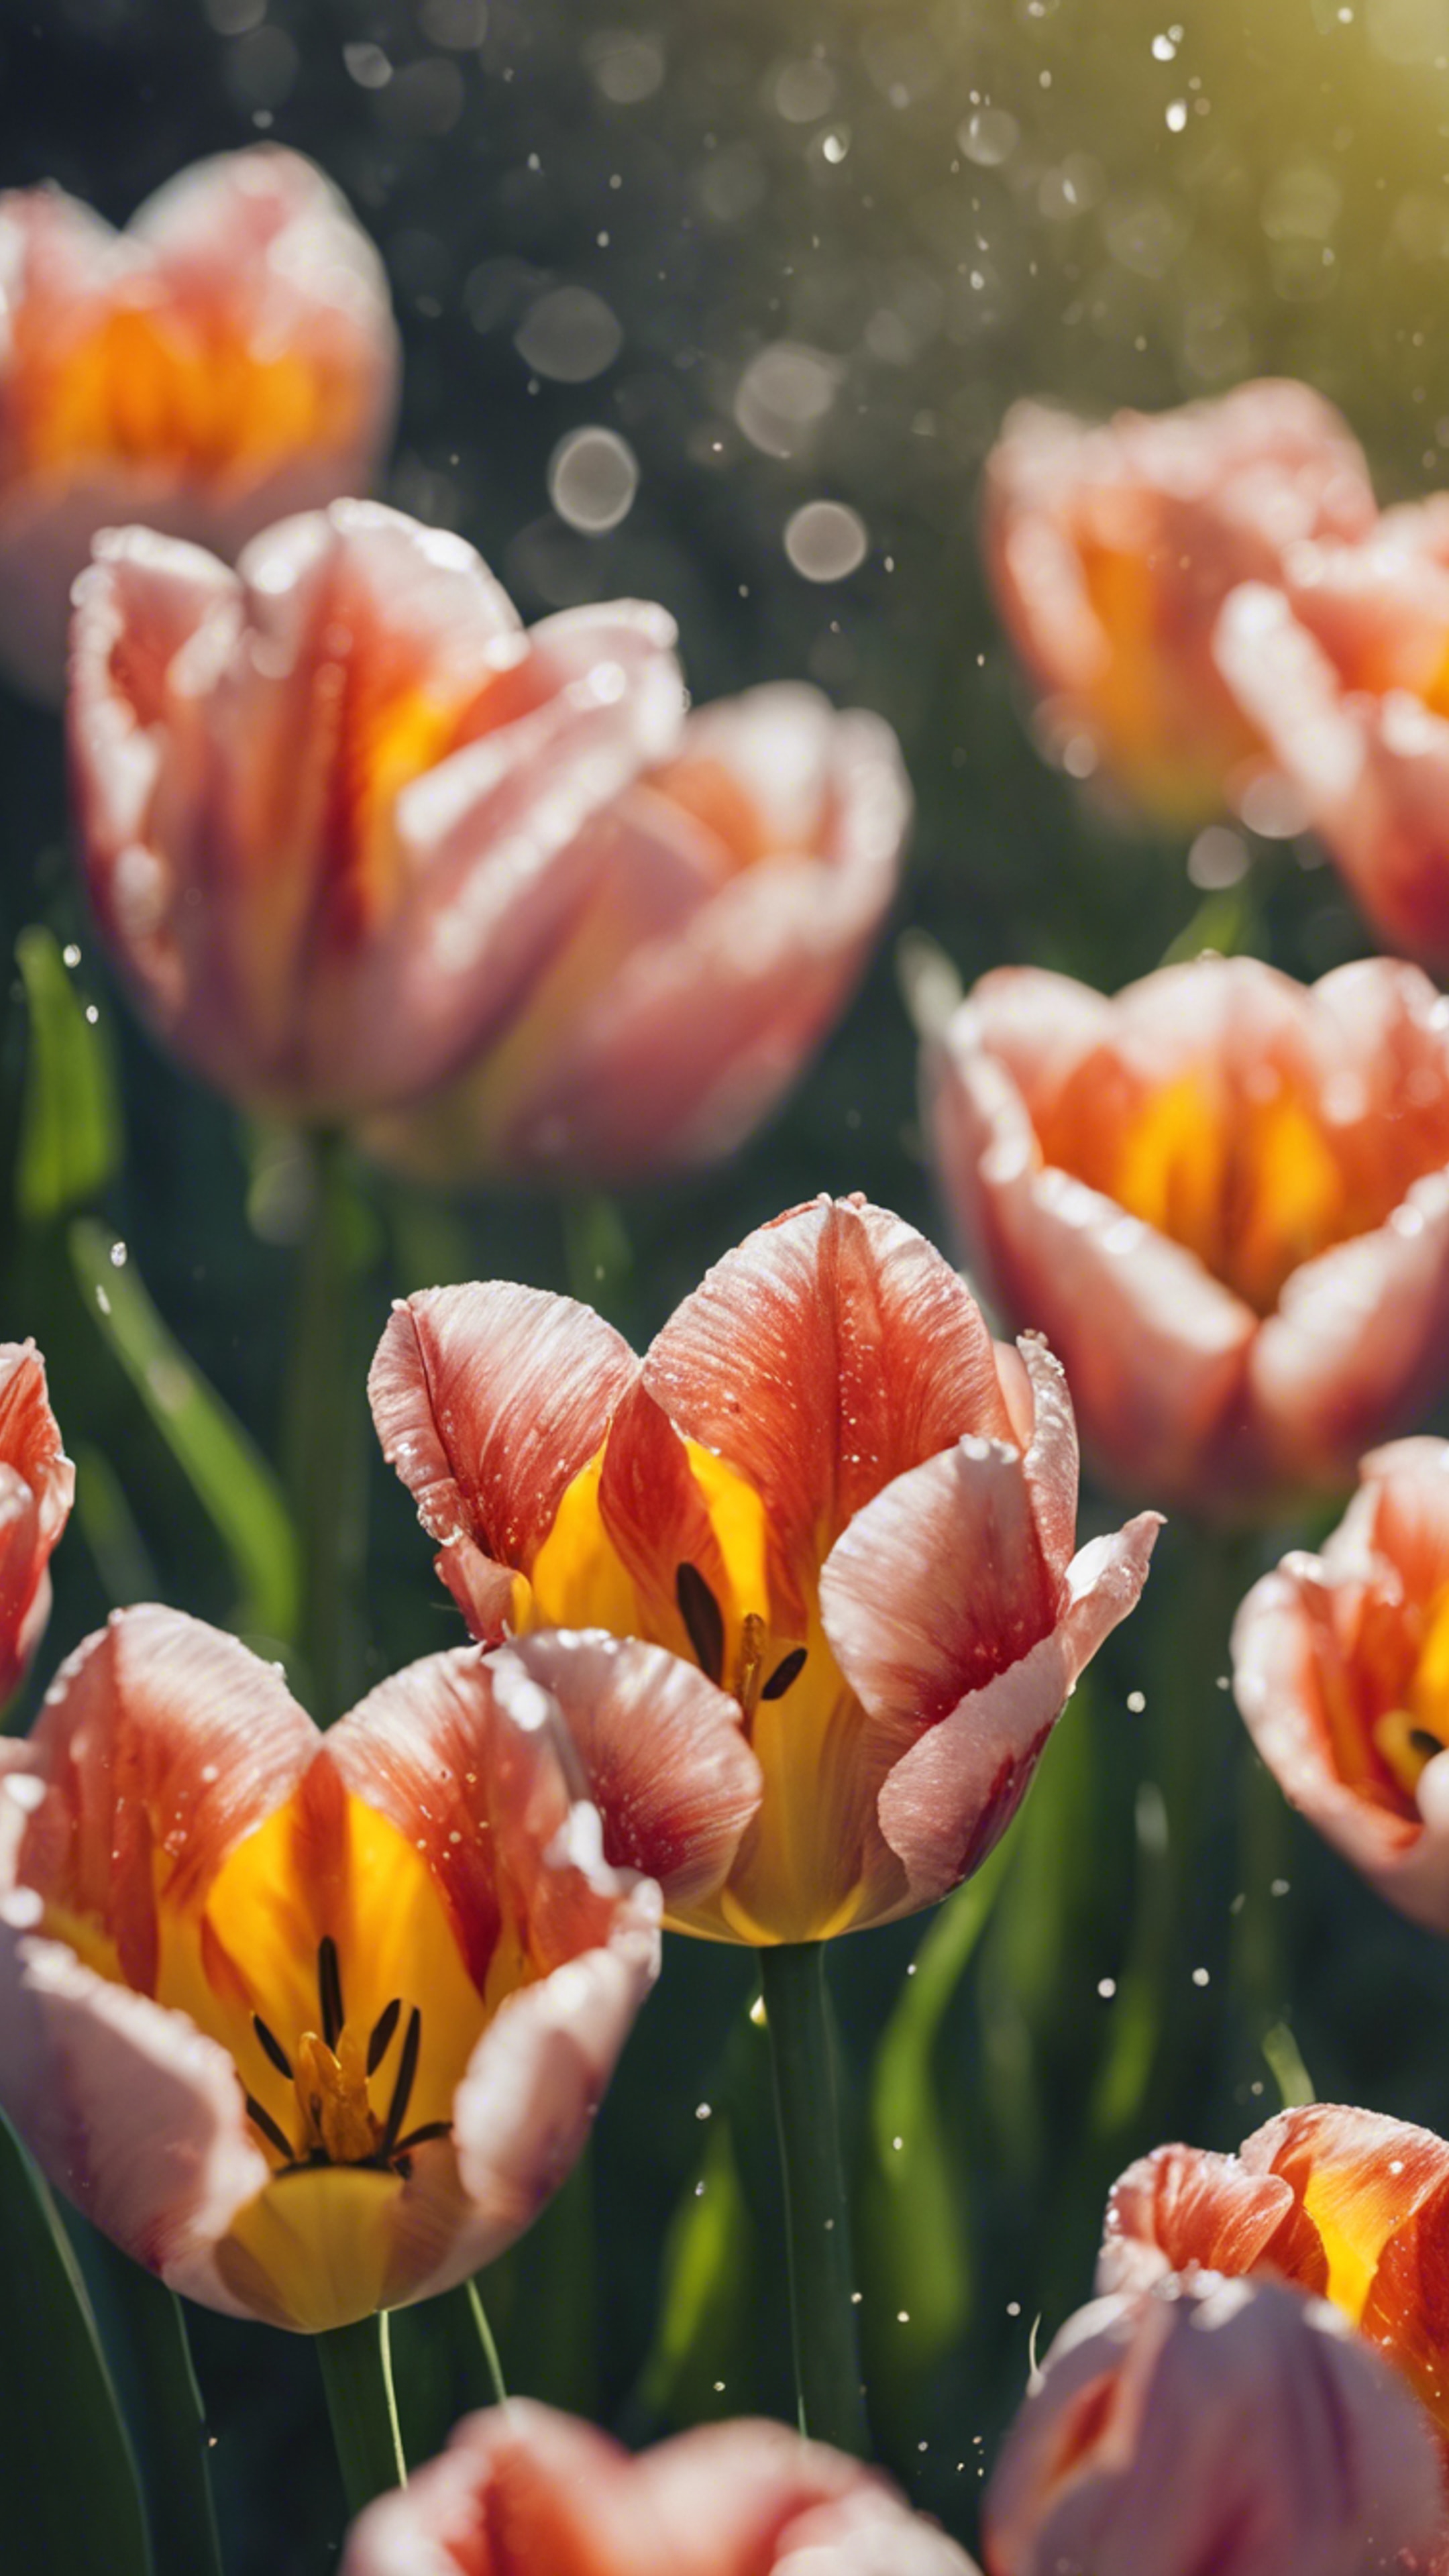 A close-up image of dew-speckled tulip petals opening to the warmth of a mild spring morning. Hintergrund[e13c163b065d4542a7e5]